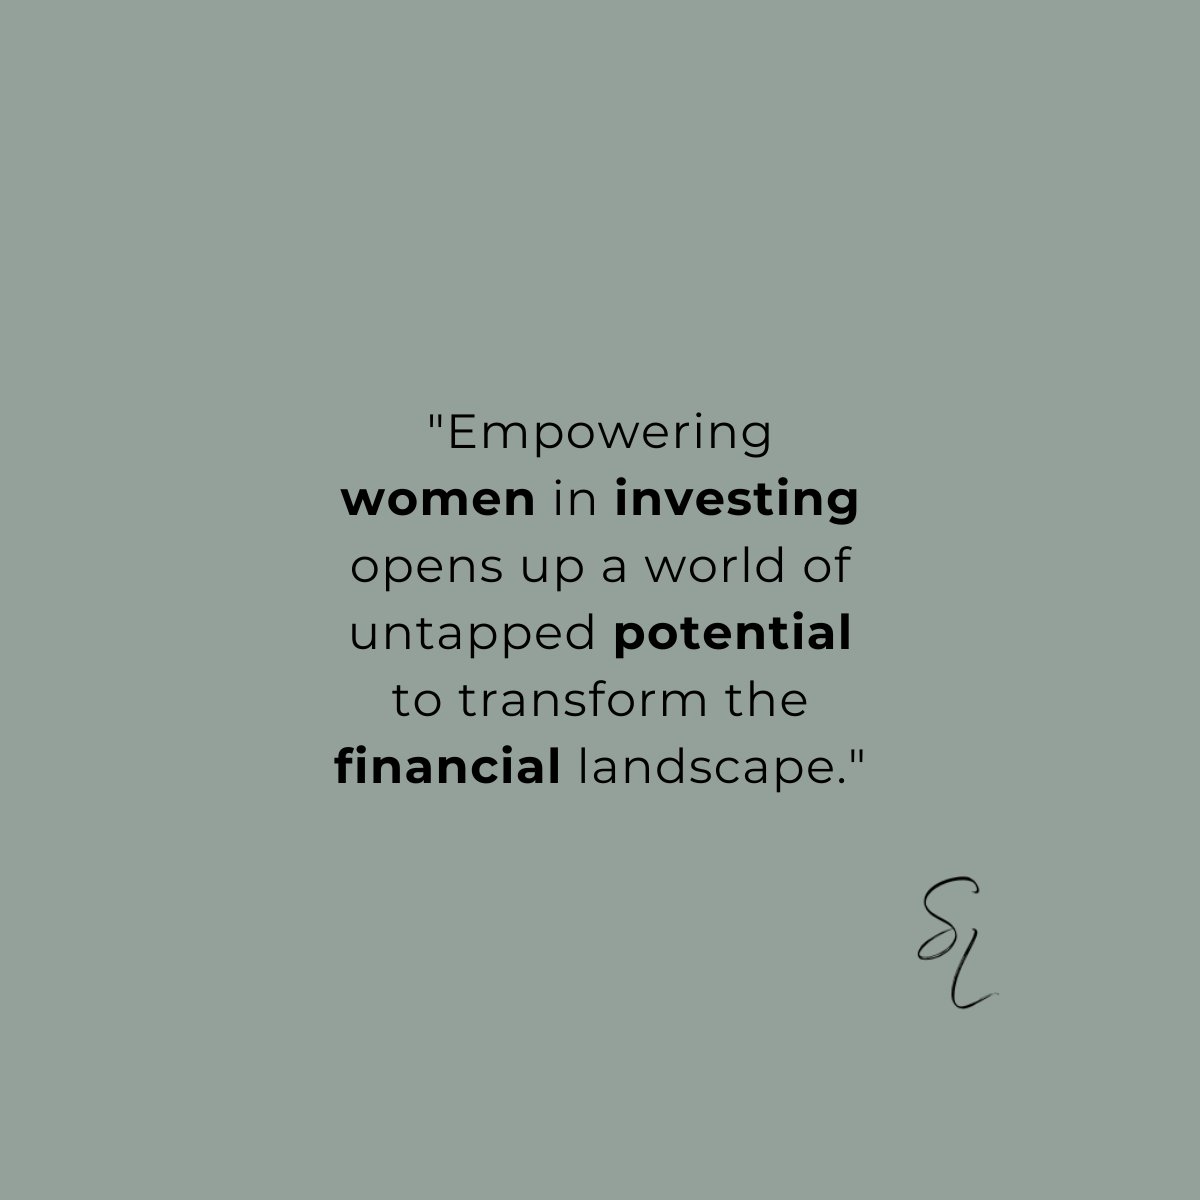 Empowering women in finance unlocks a world of potential & fresh perspectives, reshaping our financial future. It's more than equality; it's revolutionizing the industry.

#womeninfinance #investing #equality #financiallandscape